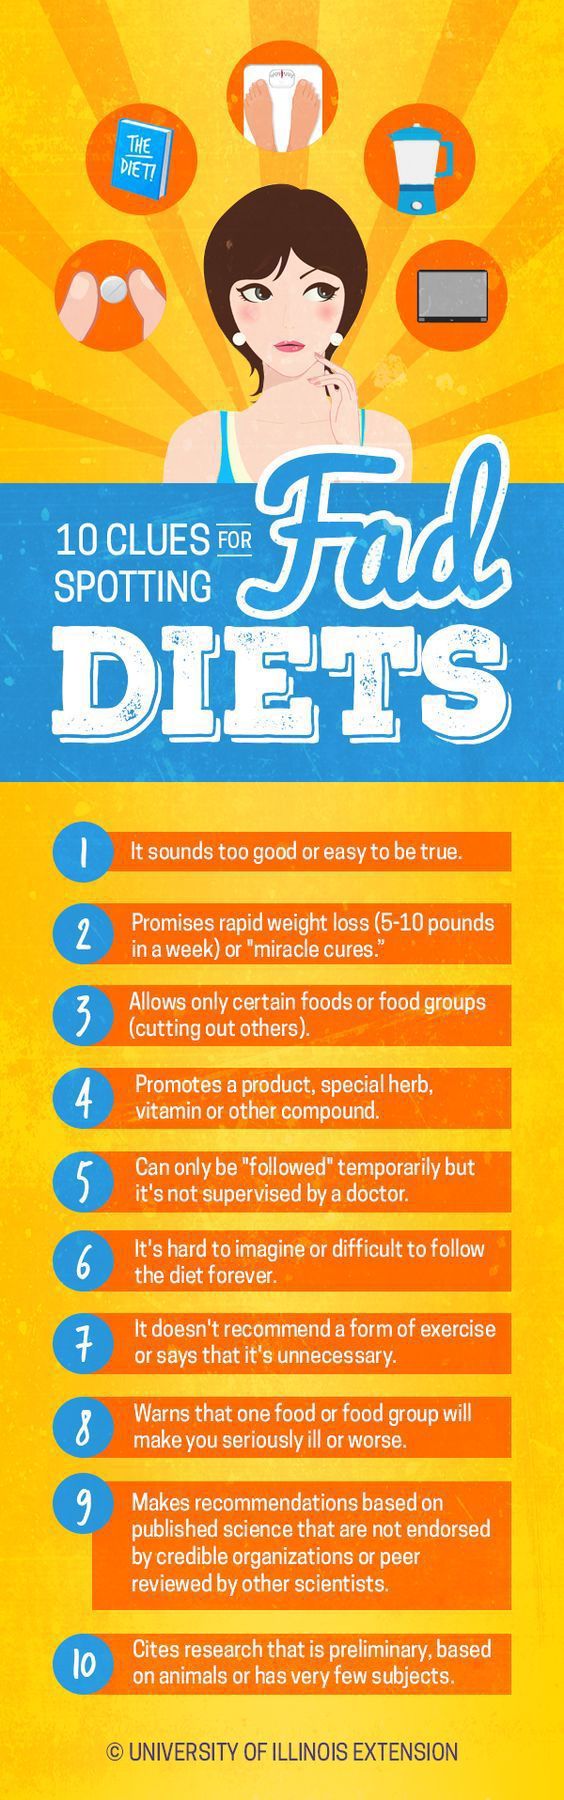 10 Clues for Spotting Fad Diets infographic